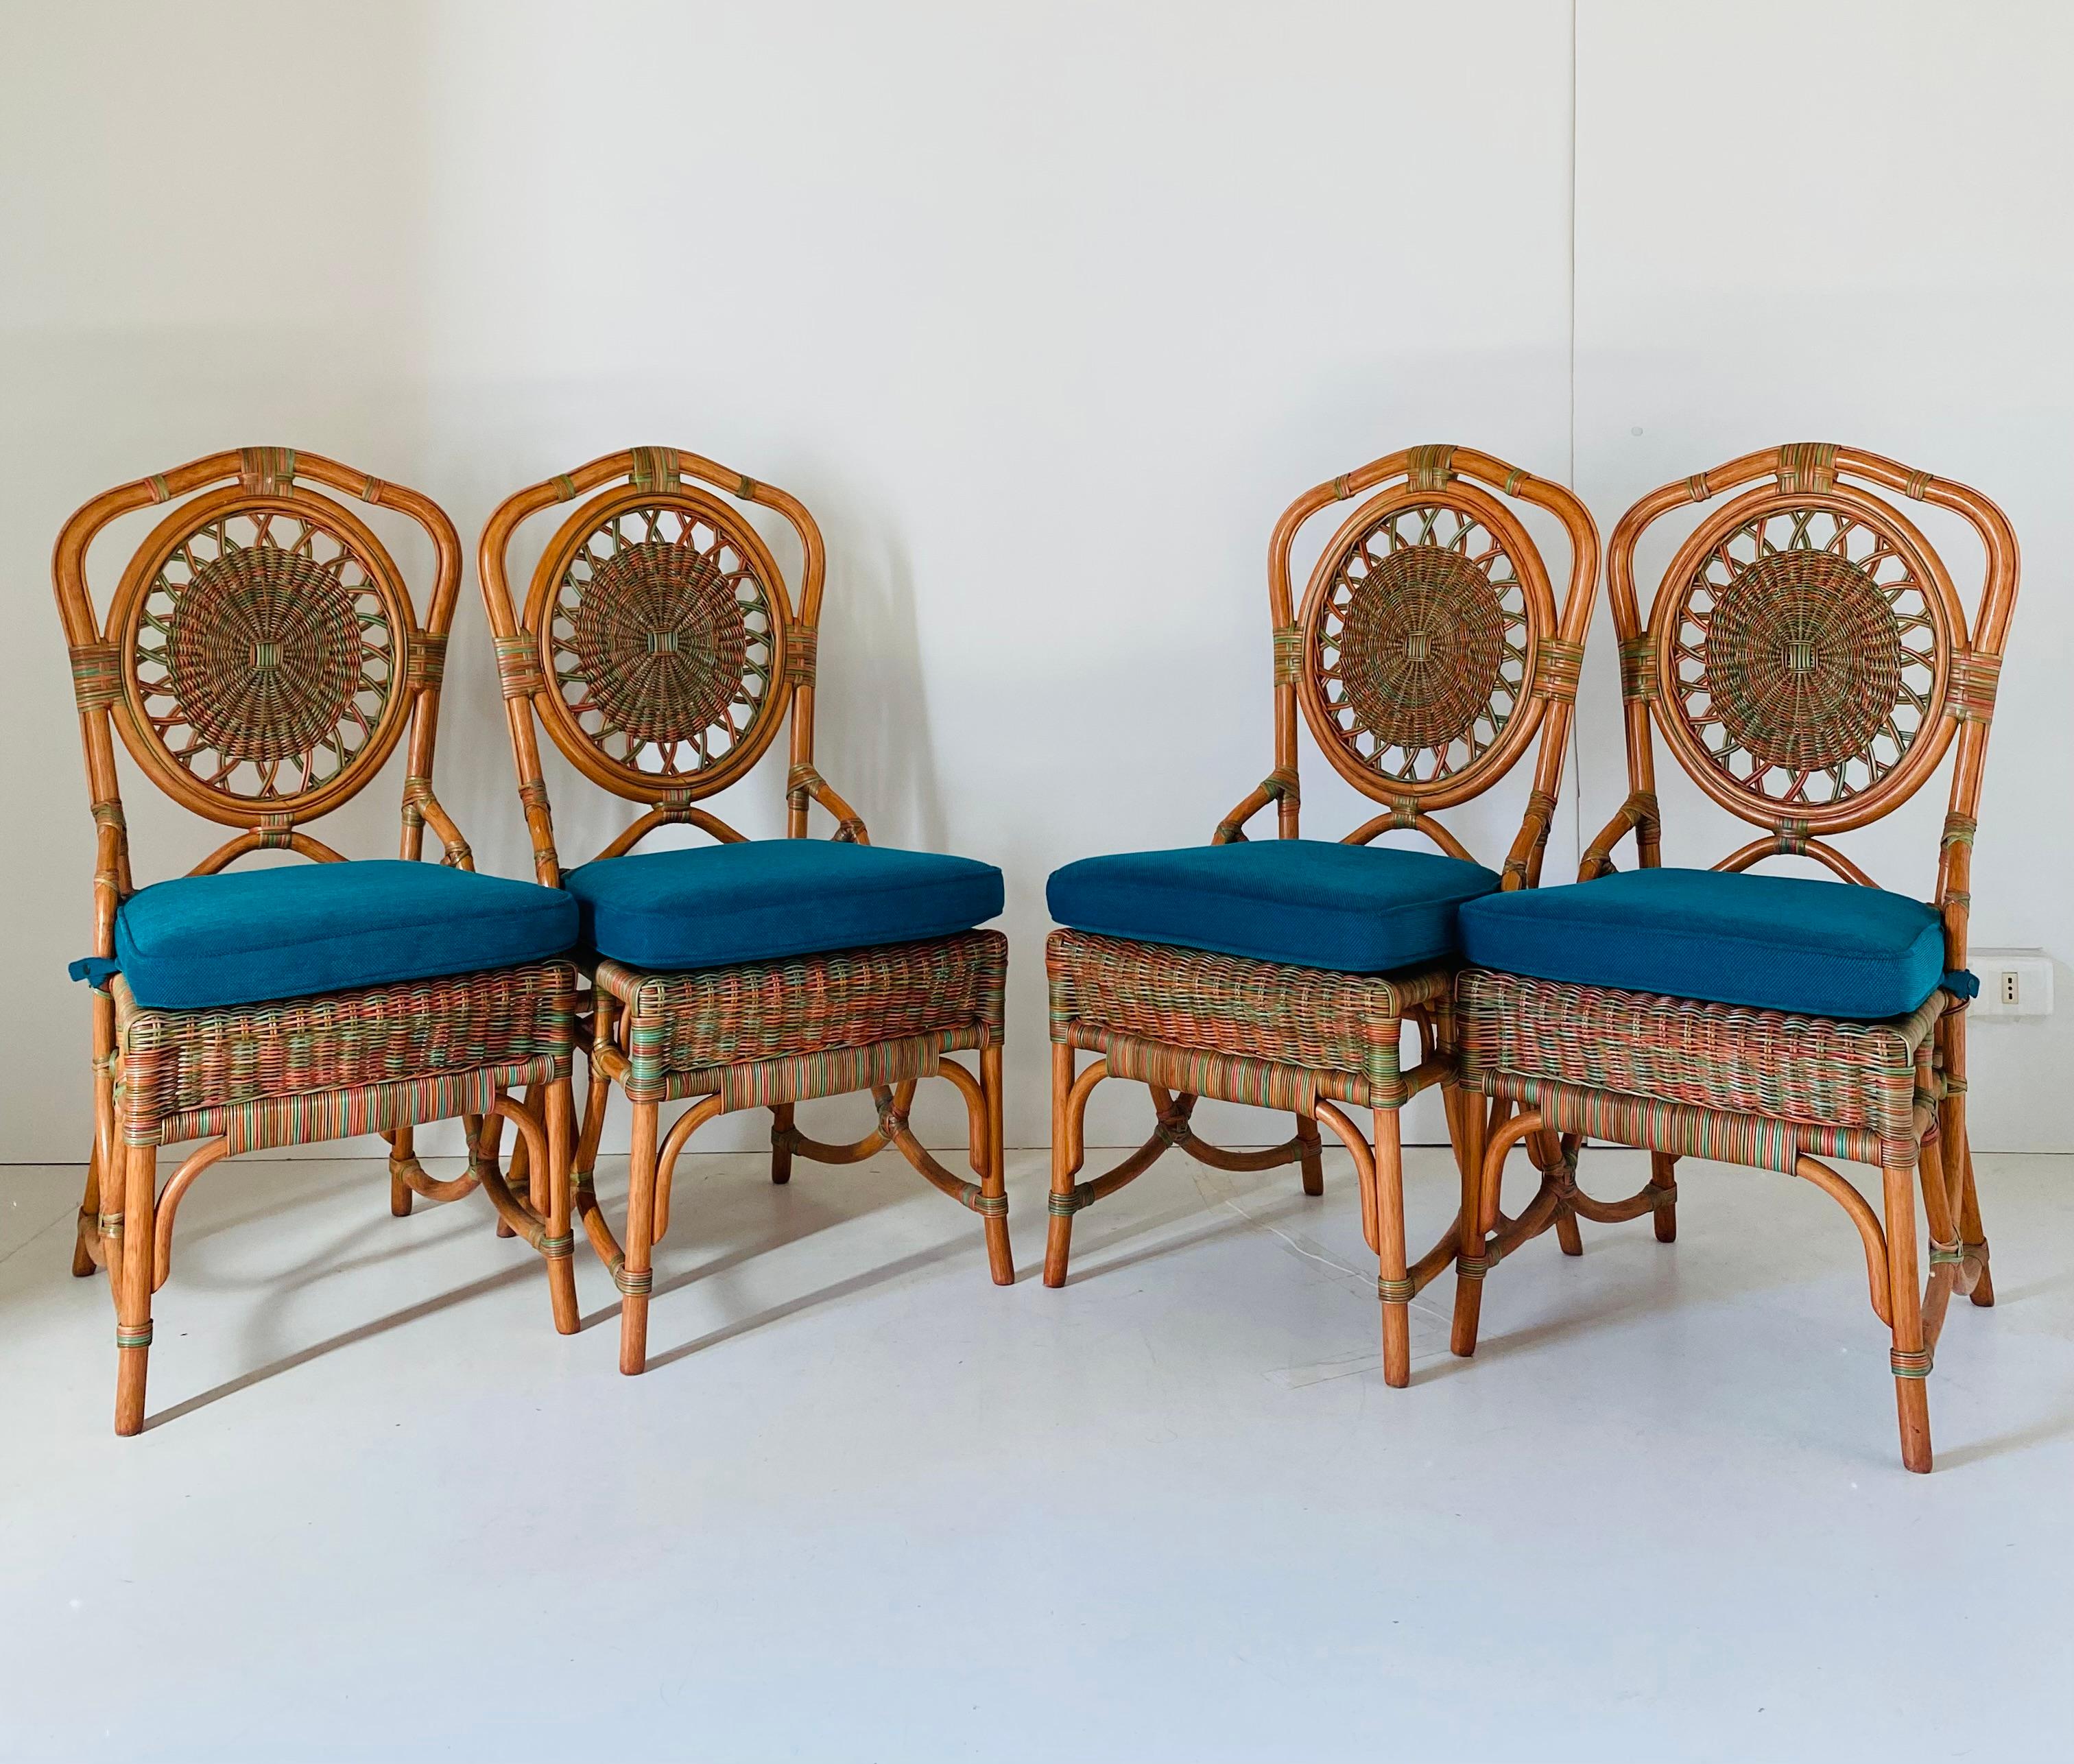 Beautiful set of four vintage chairs with rattan structure and confortable fabric pillow on the seat. Nicely decored dining chairs set with strong and elegant curved rattan structure. 1960s piece of design in pure colonial style. In really good